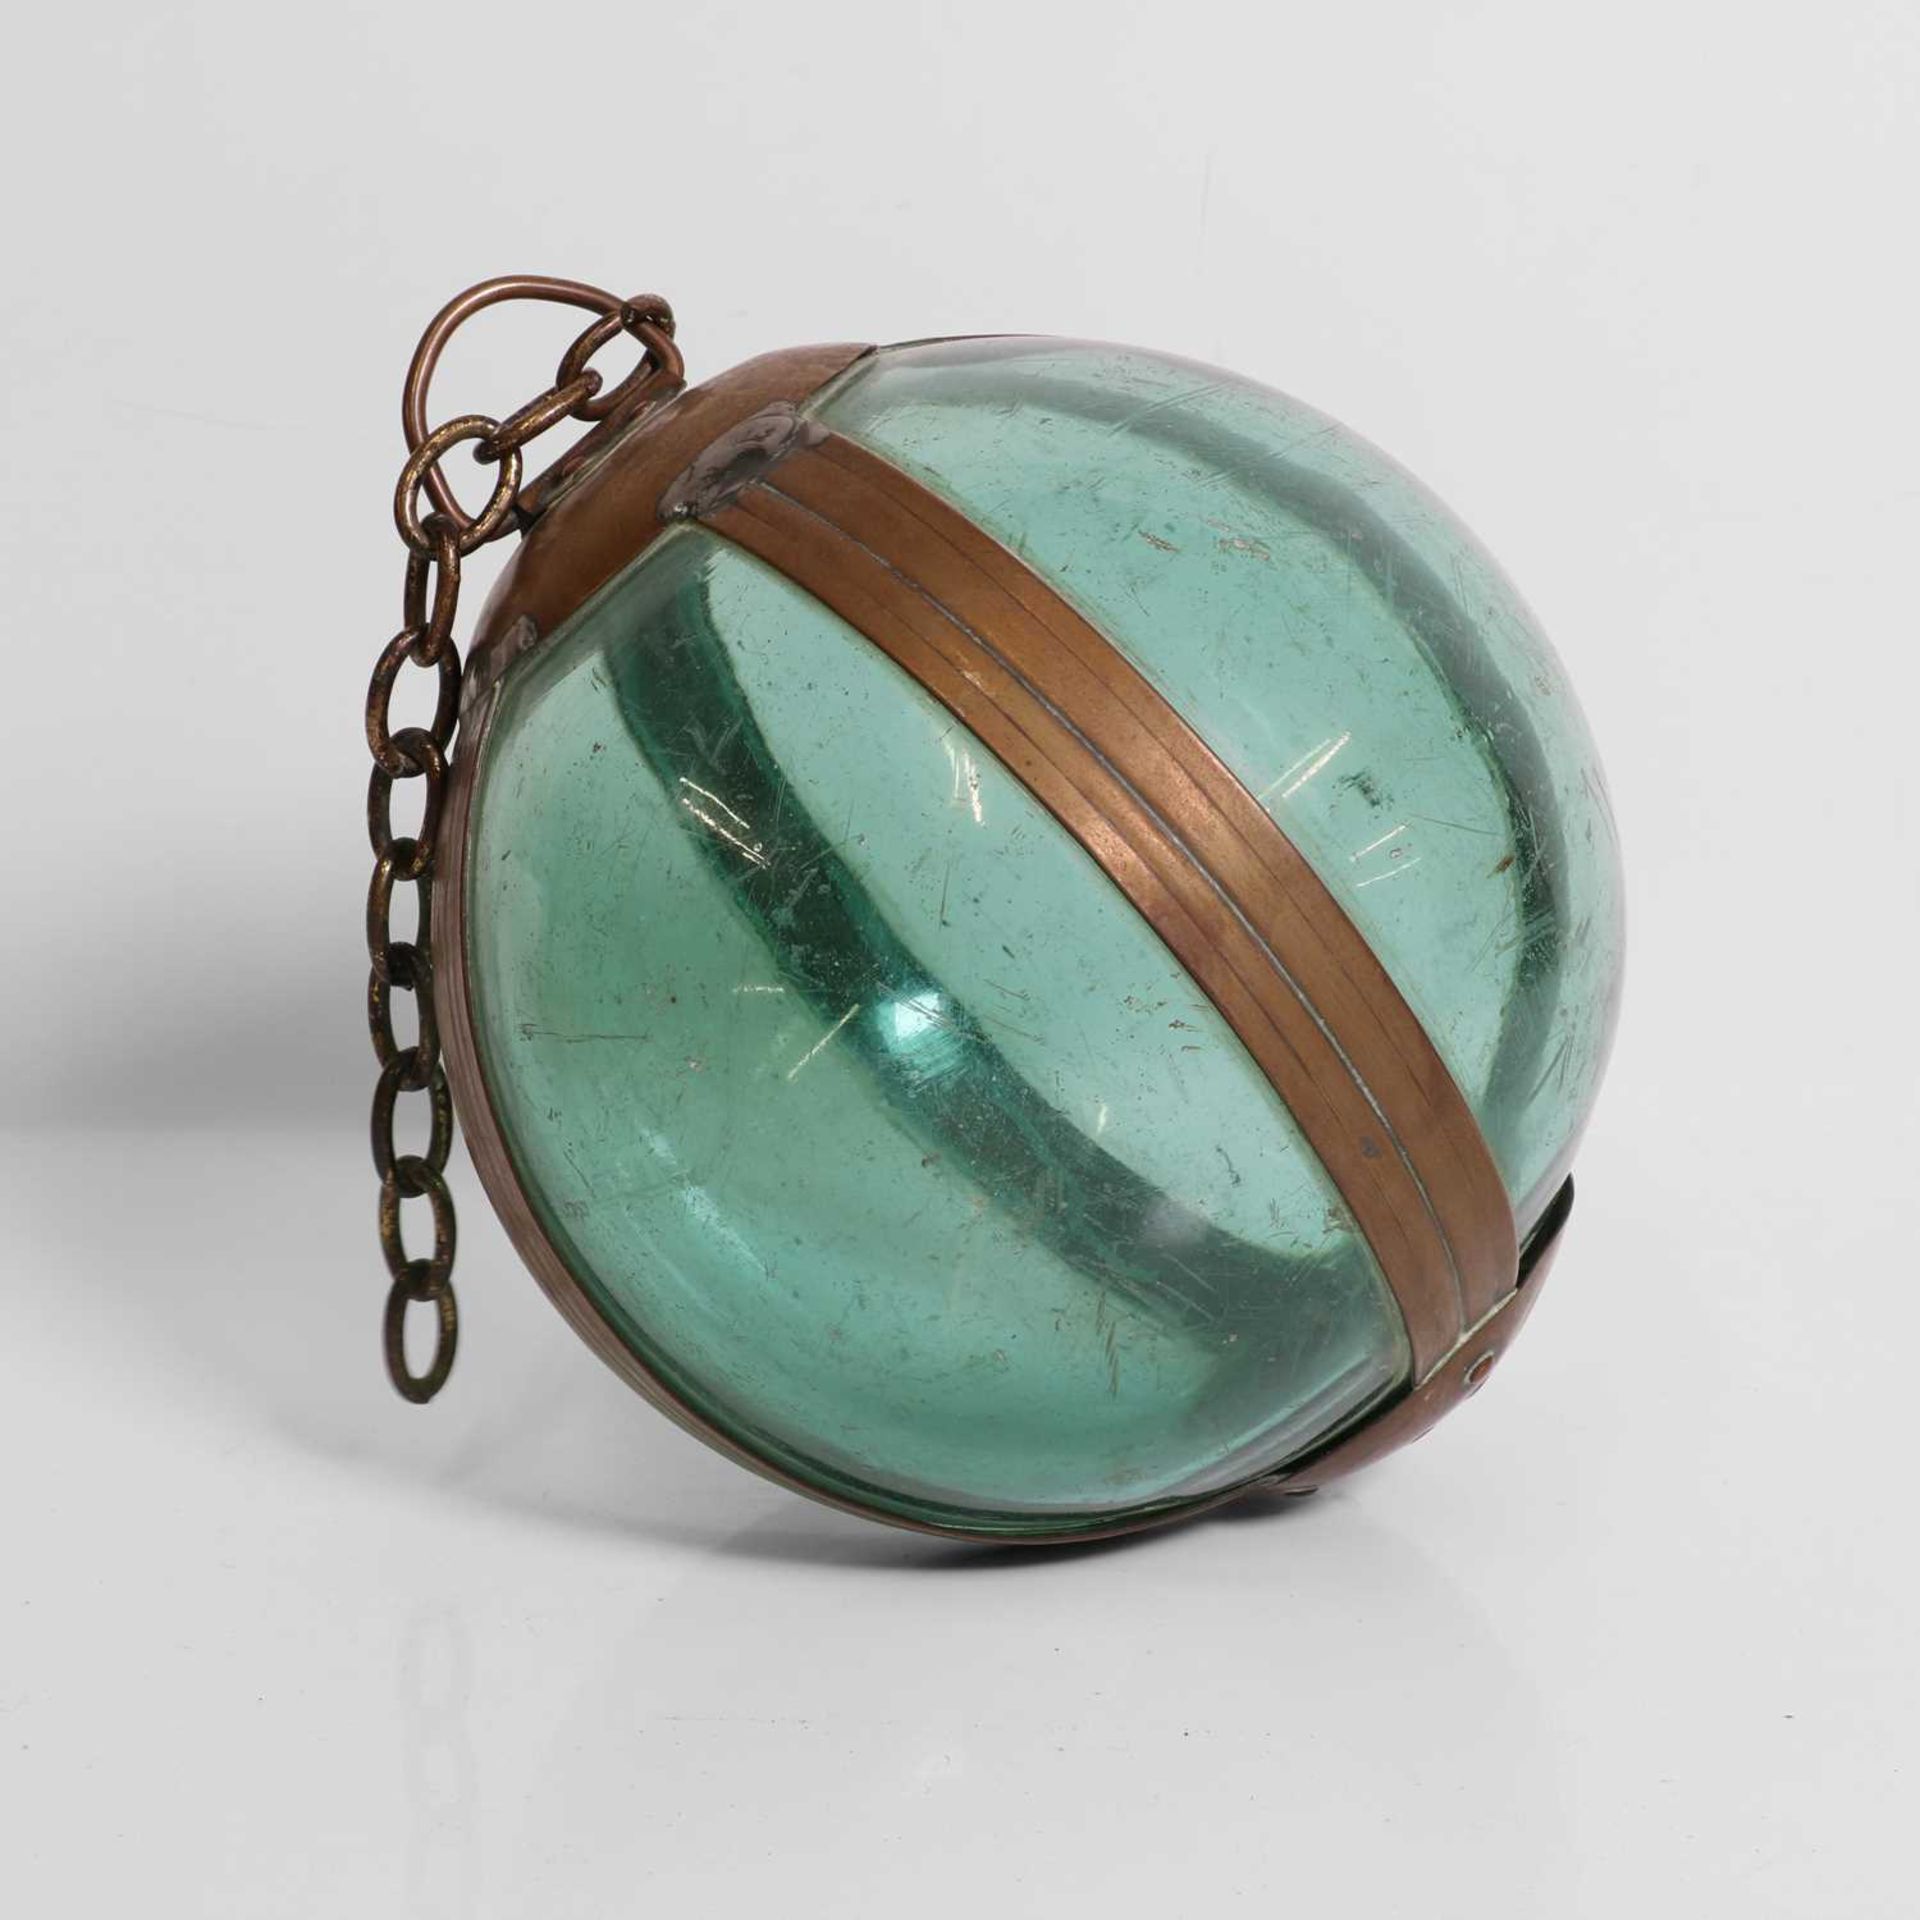 A brass-mounted pale-green glass buoy or fishing float, - Image 3 of 7